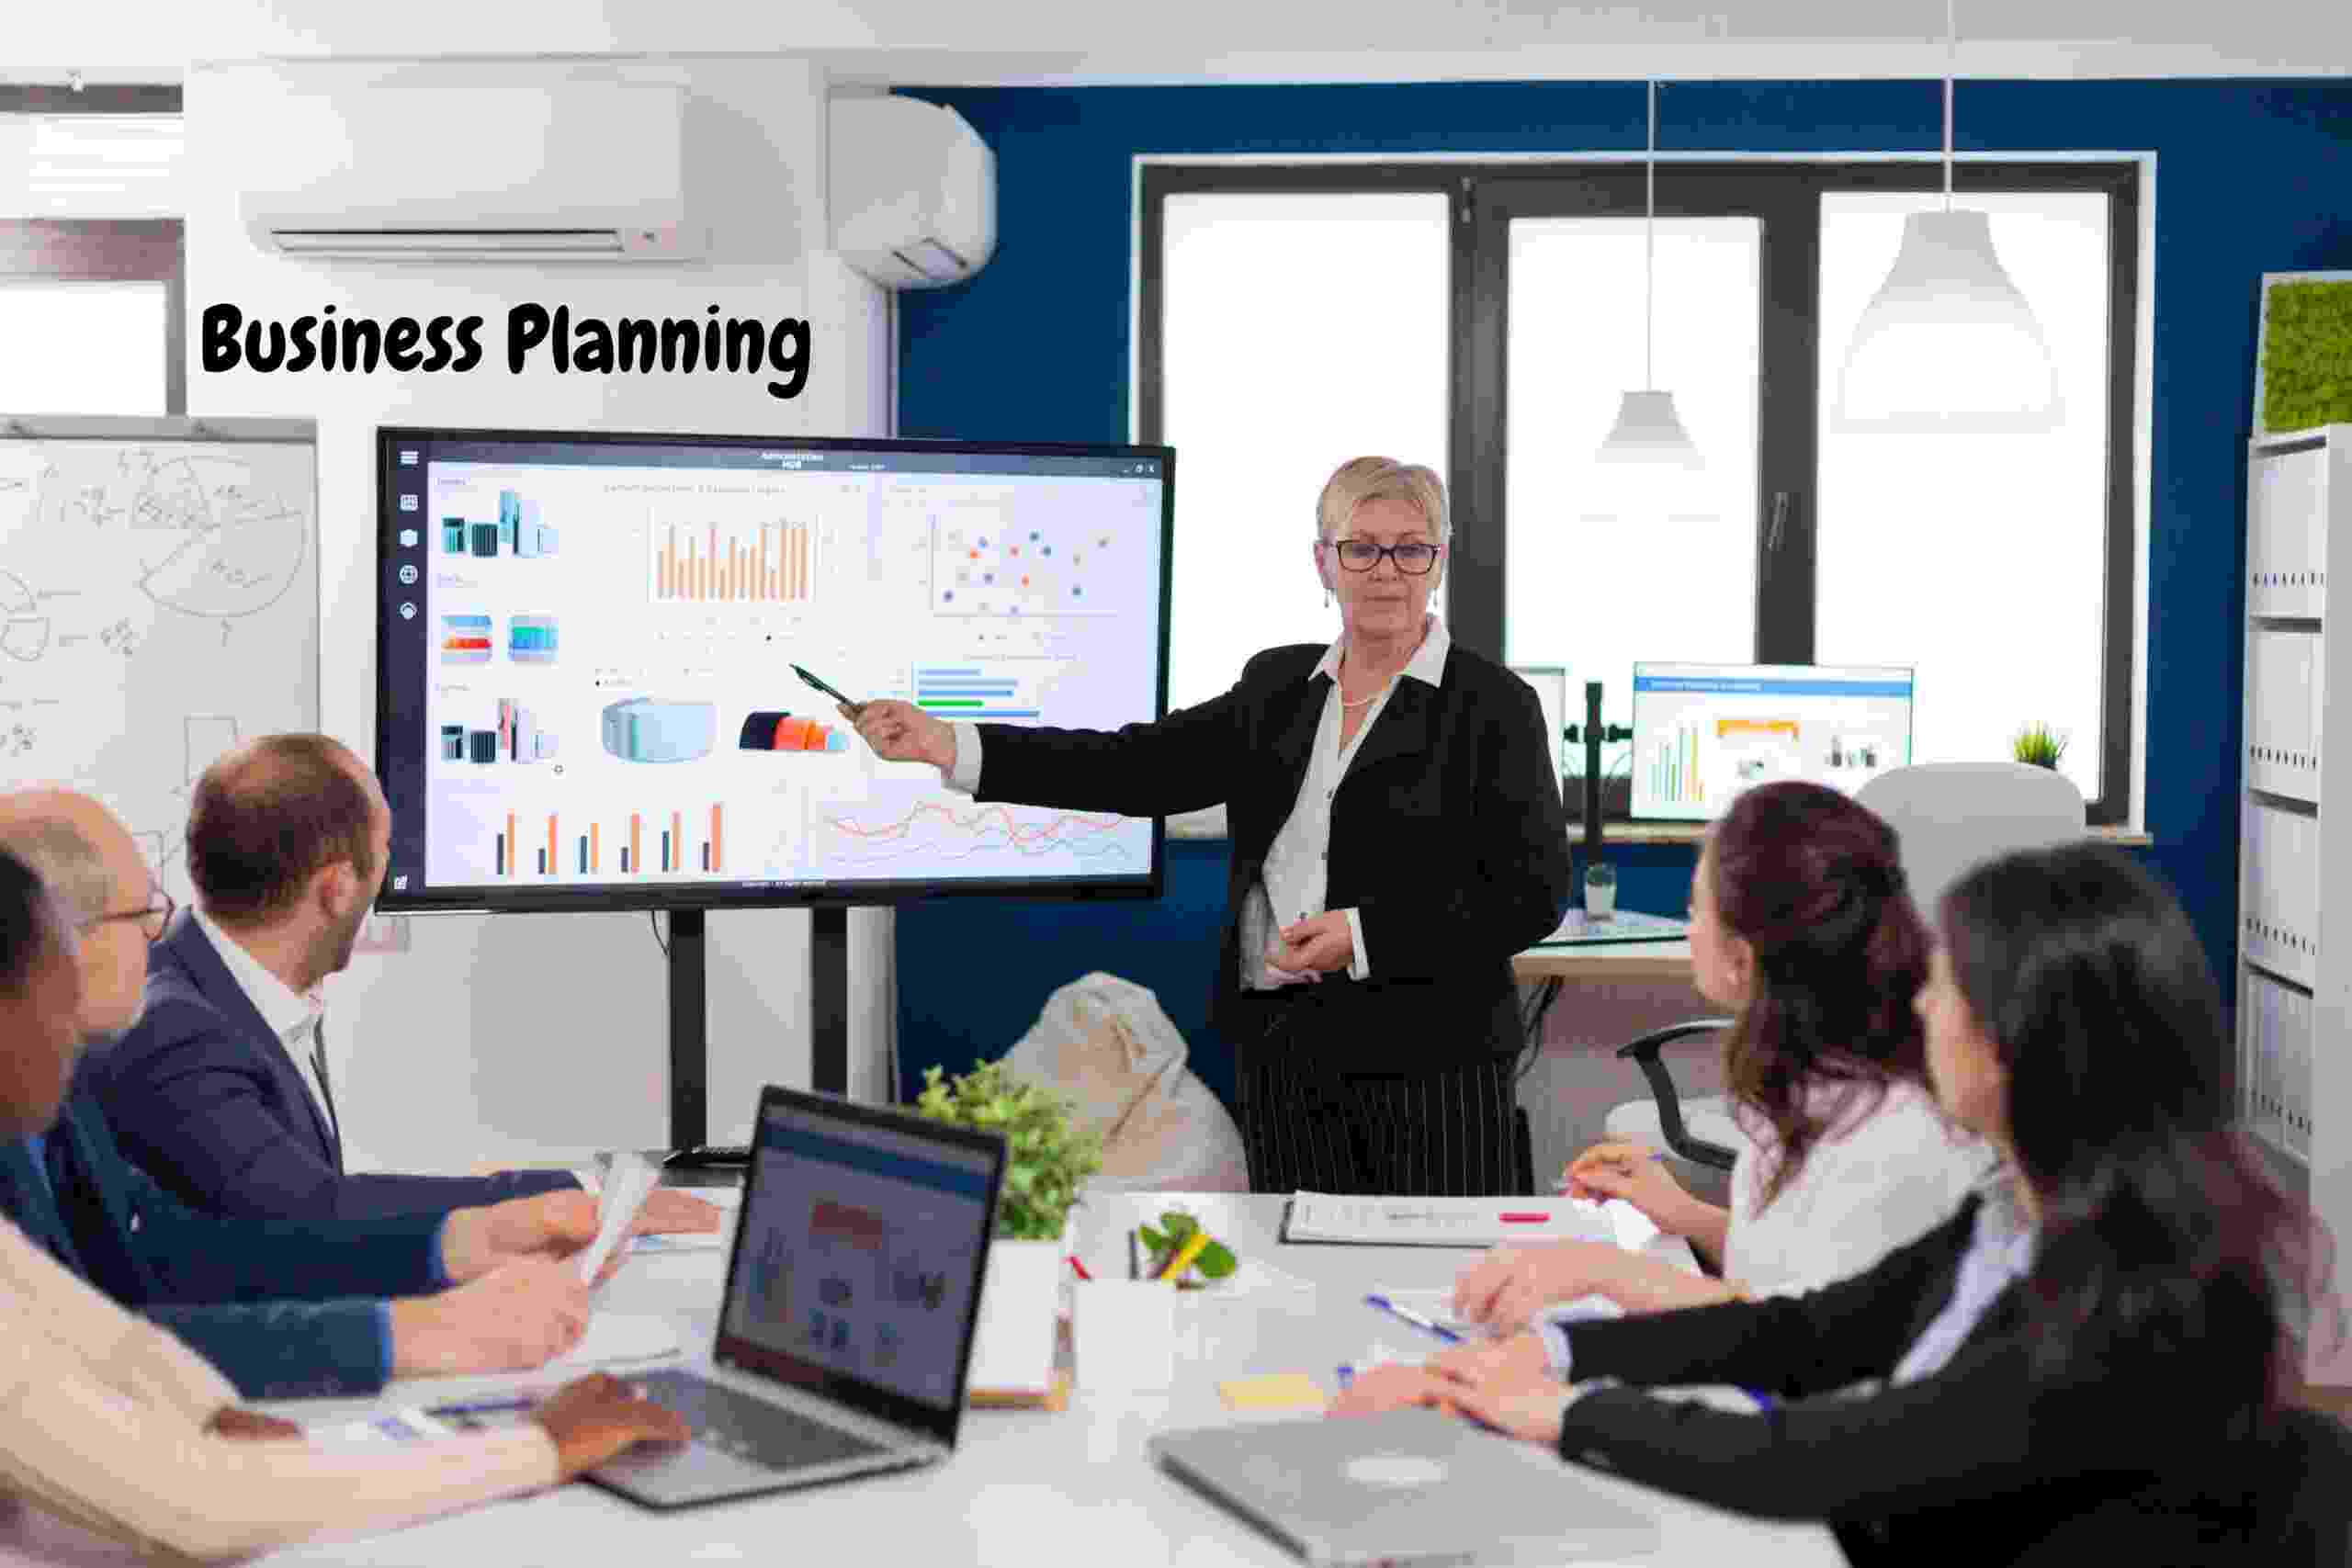 tips for business planing